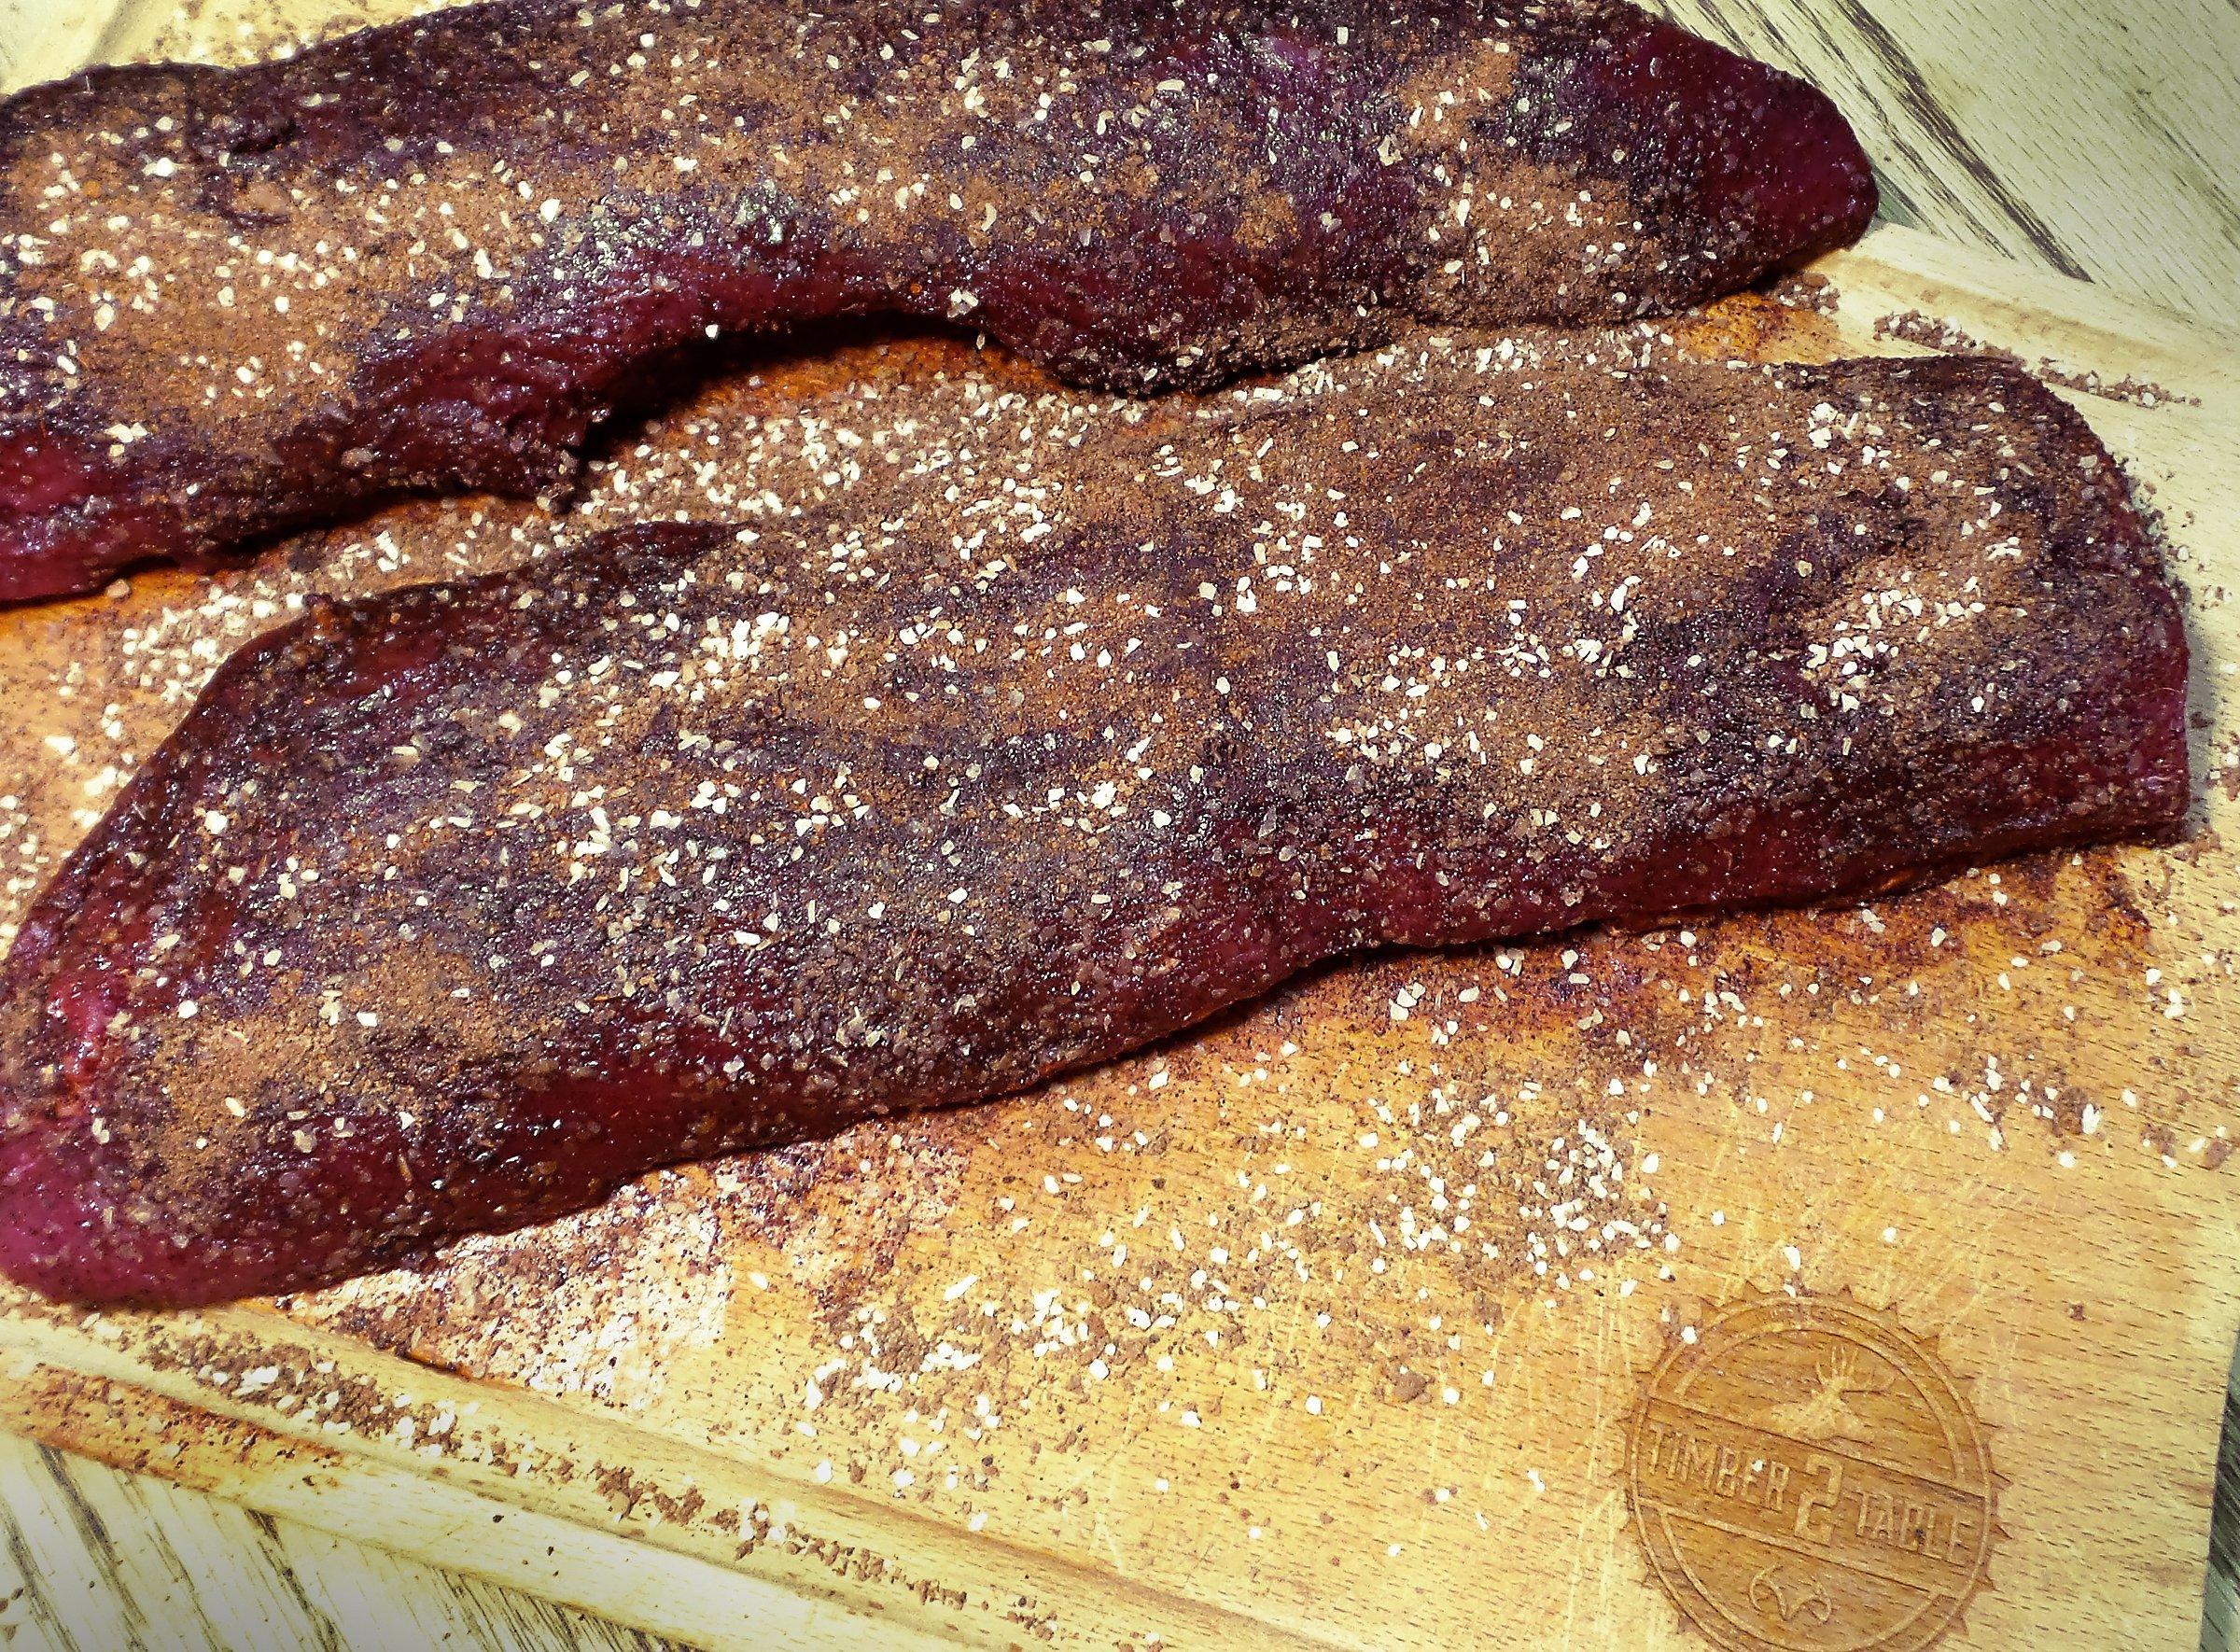 Coat the backstrap with the dry rub.